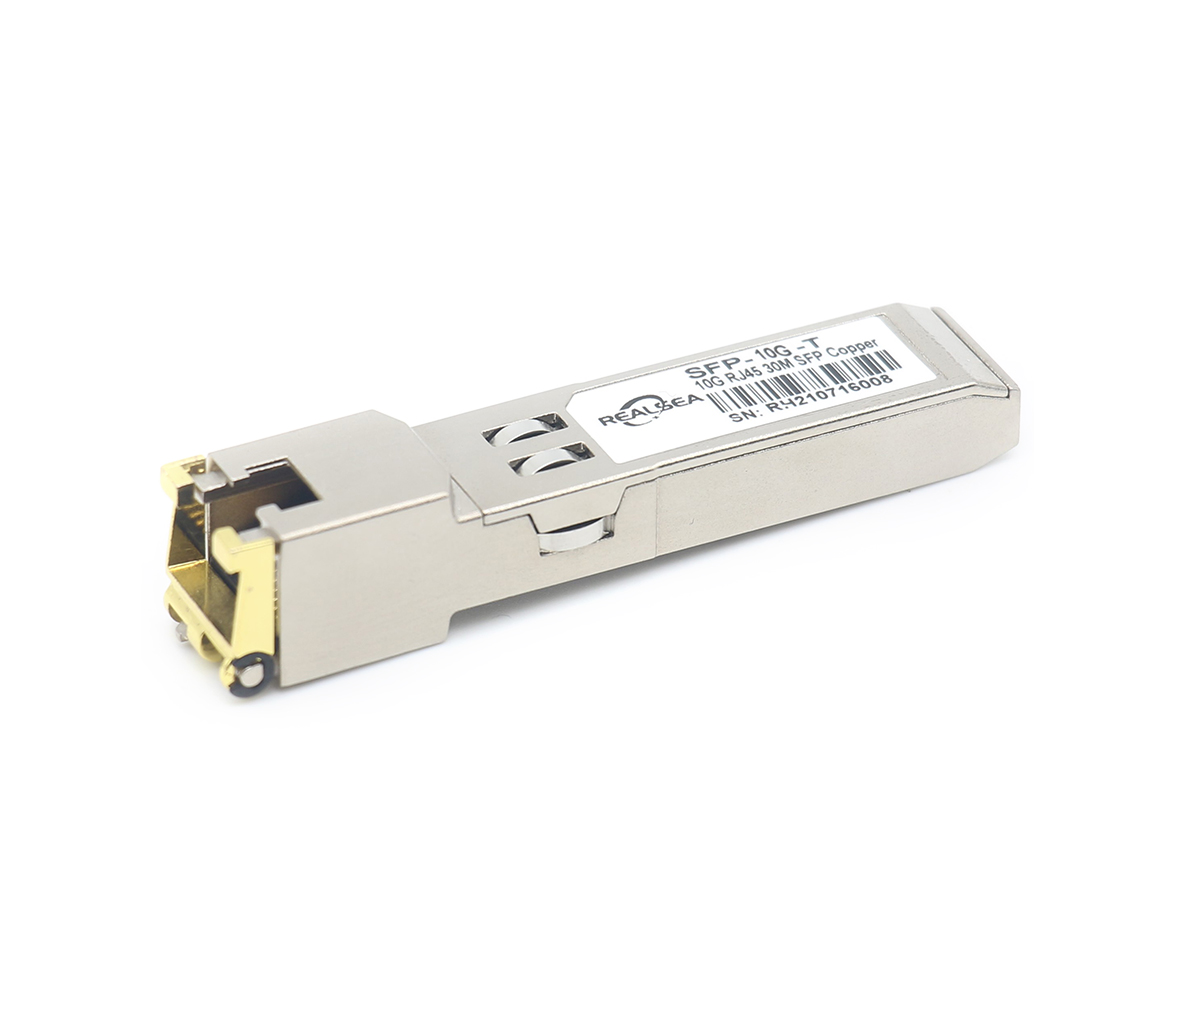 The market expects the optical module business to continue to grow.Optical Fiber Transceiver